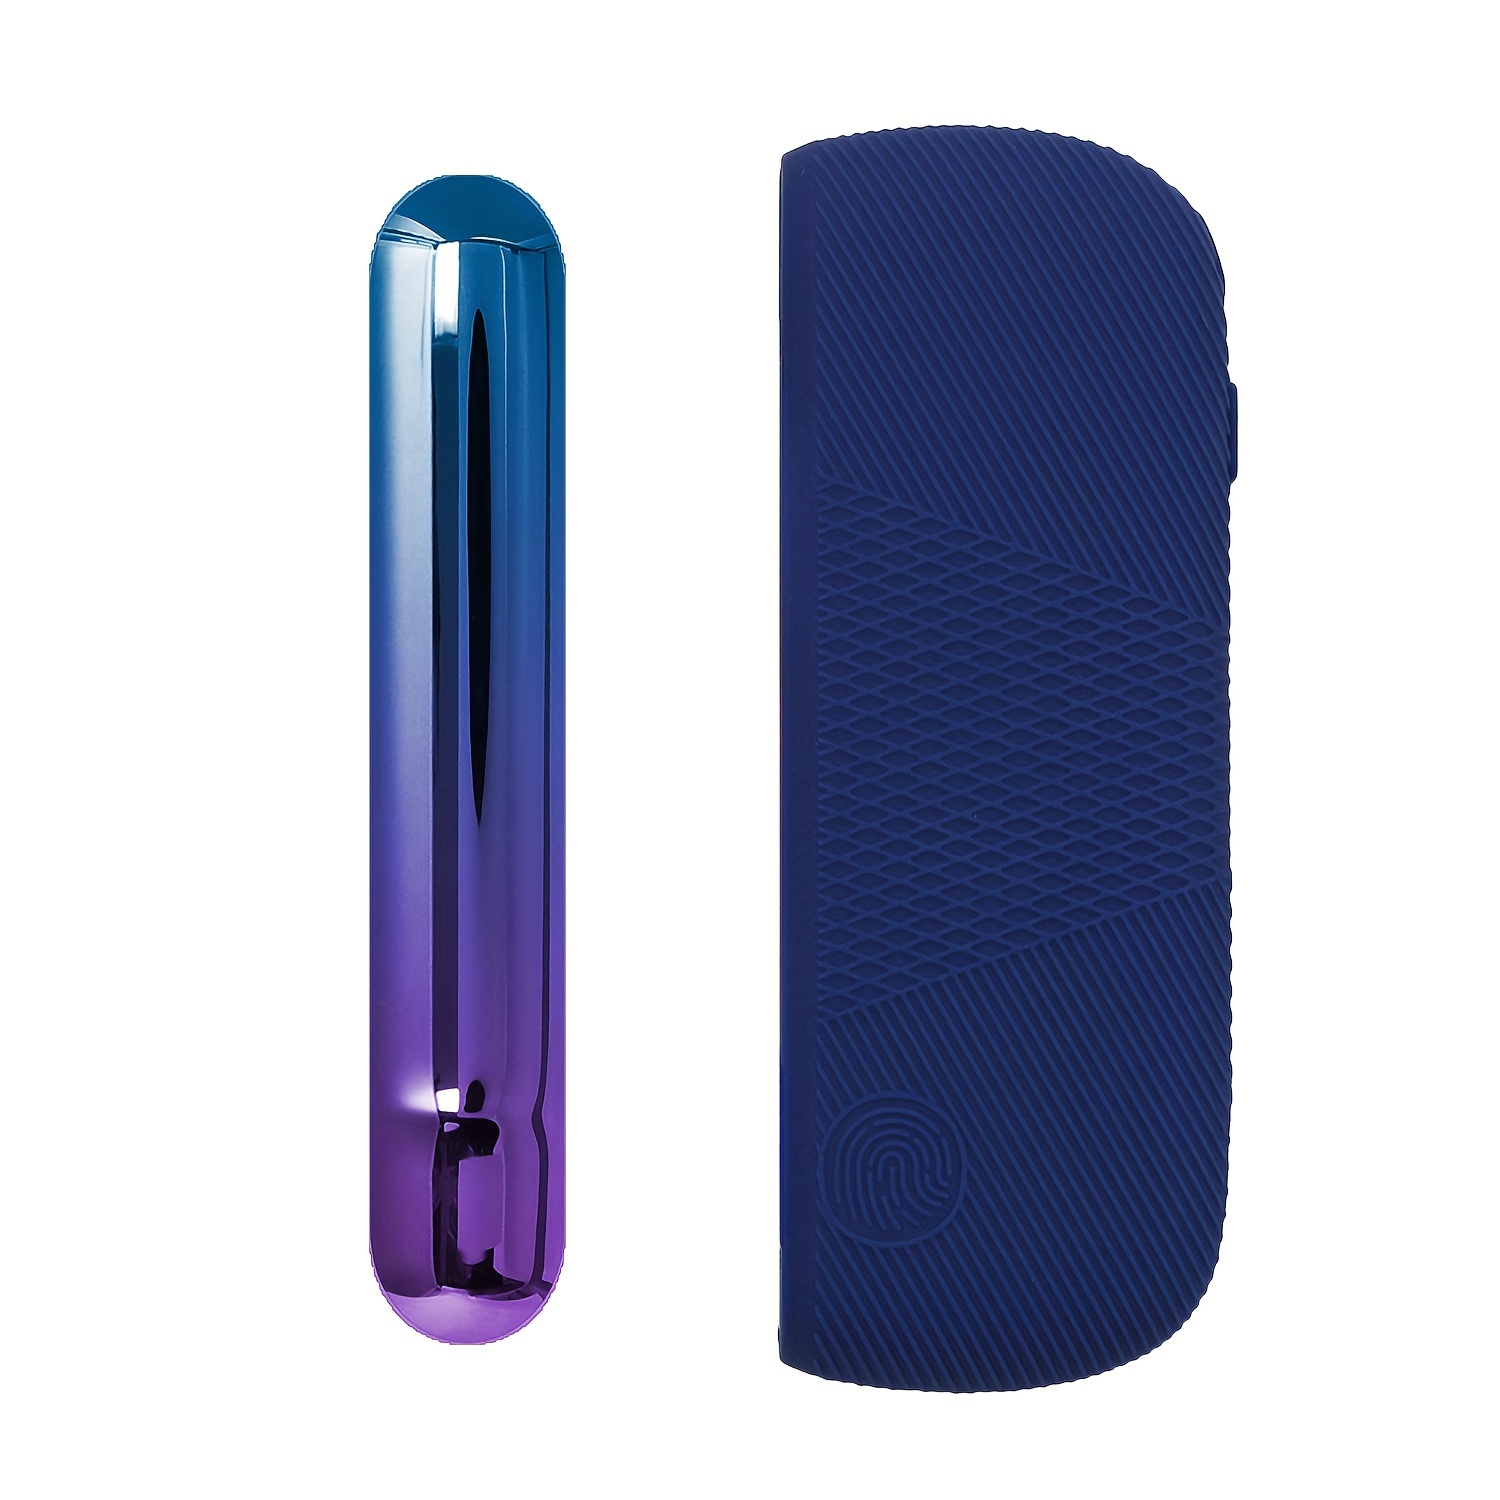 High Quality Silicone Case Cover For Iqos 3 Iqos Duo 3 Case With Door Cover  Gift Box Package Multi Colors